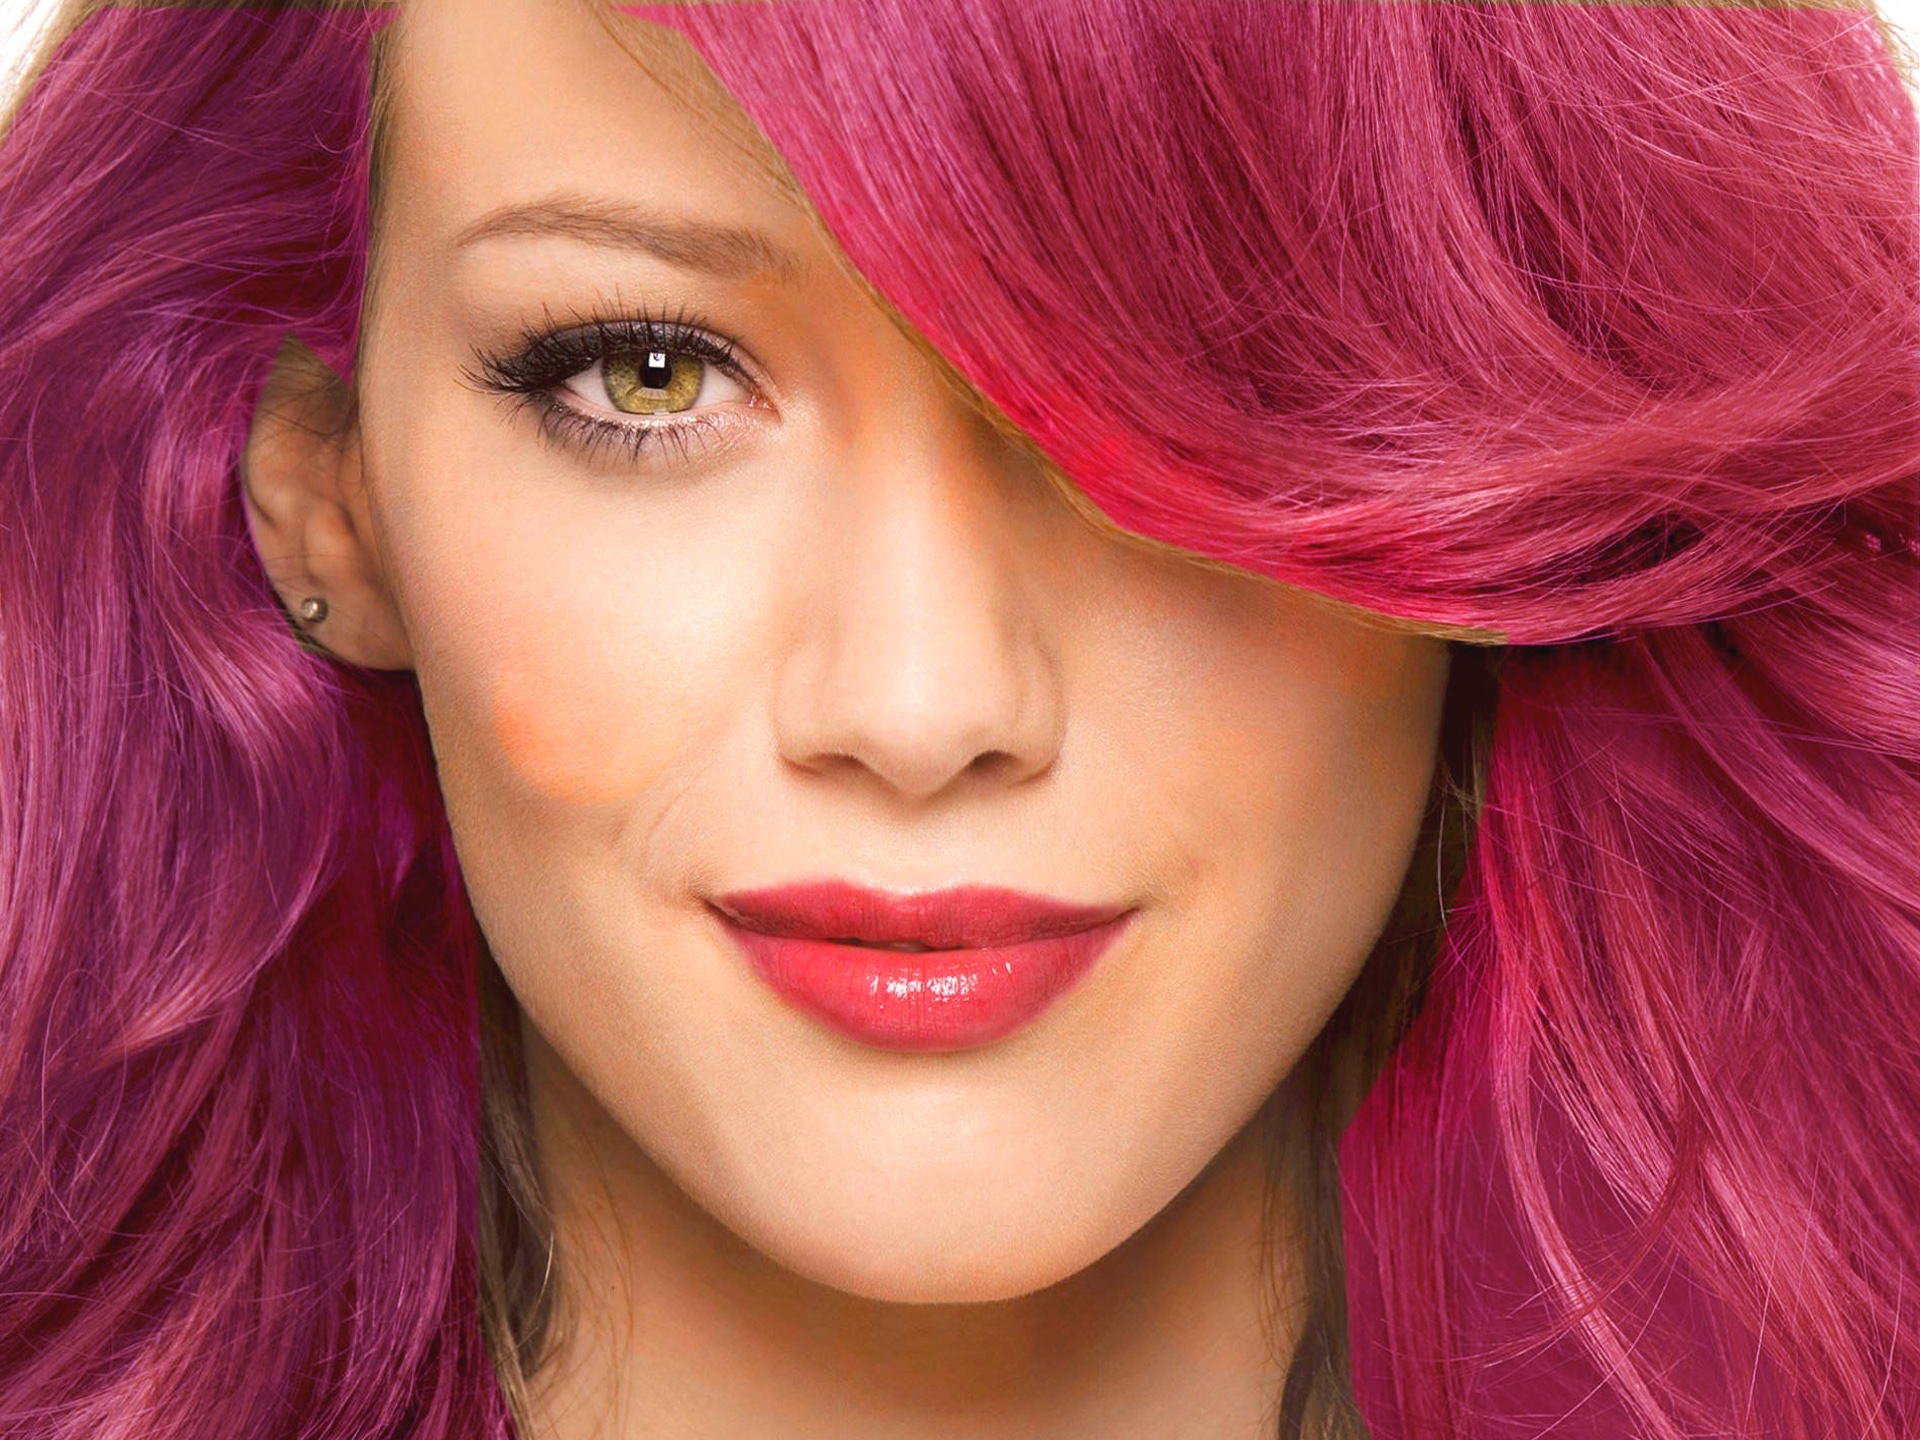 5. The Dos and Don'ts of Dyeing Your Hair at Home - wide 9